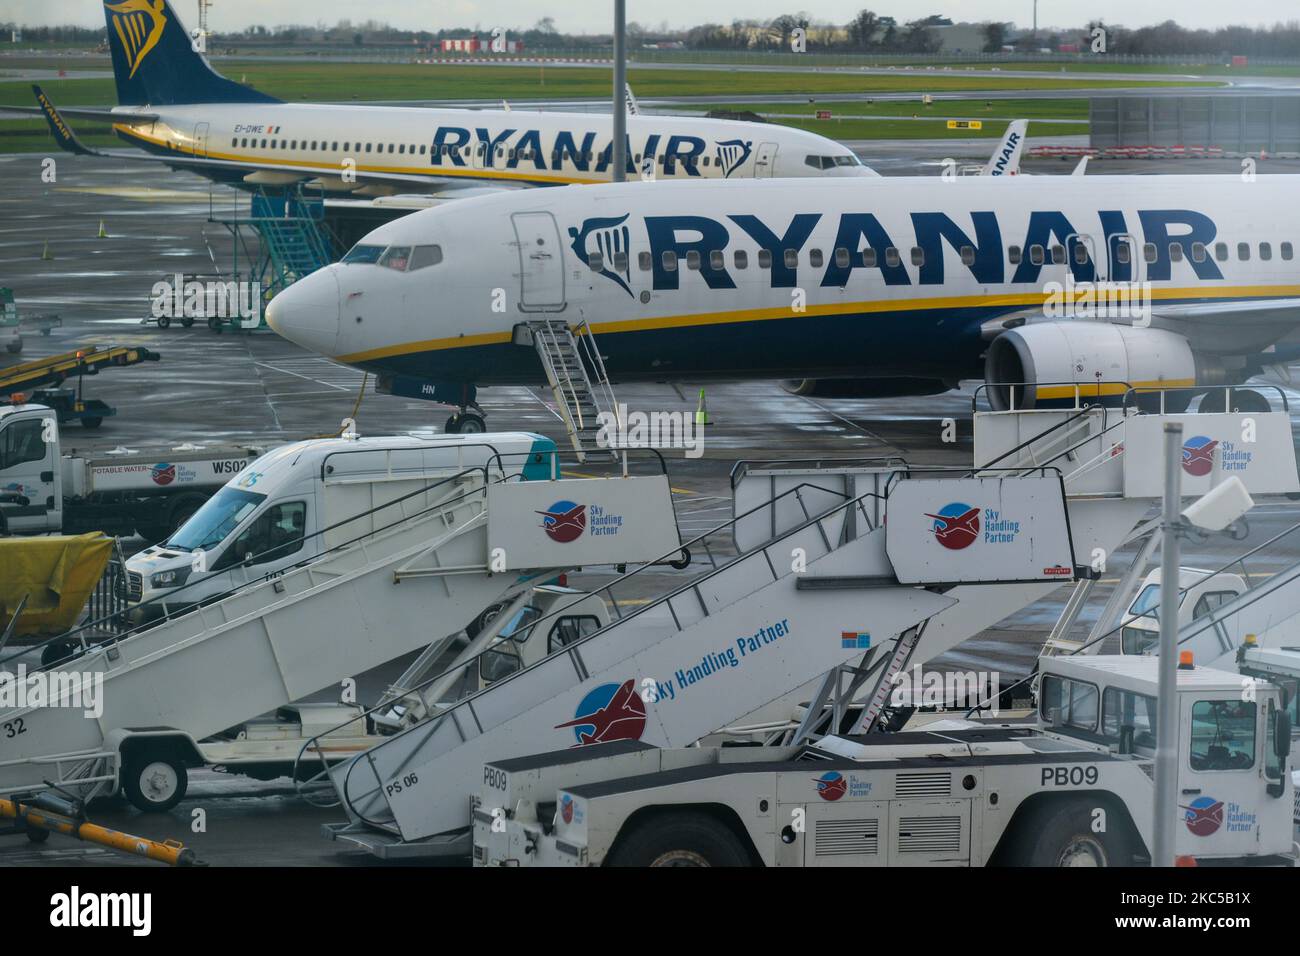 Ryanair planes seen grounded at Dublin Airport, during the coronavirus lockdown level 3. The pandemic has had a 'devastating' impact on the operator of Dublin airport. DAA's losses at the beginning of September 2020 were approaching €150 million - according to its chief executive Dalton Philips. Many airports across the EU are now under intense financial pressure due to the slump in passenger numbers because of the Covid pandemic. On Saturday, December 05, 2020, in Dublin Airport Dublin, Ireland. (Photo by Artur Widak/NurPhoto) Stock Photo